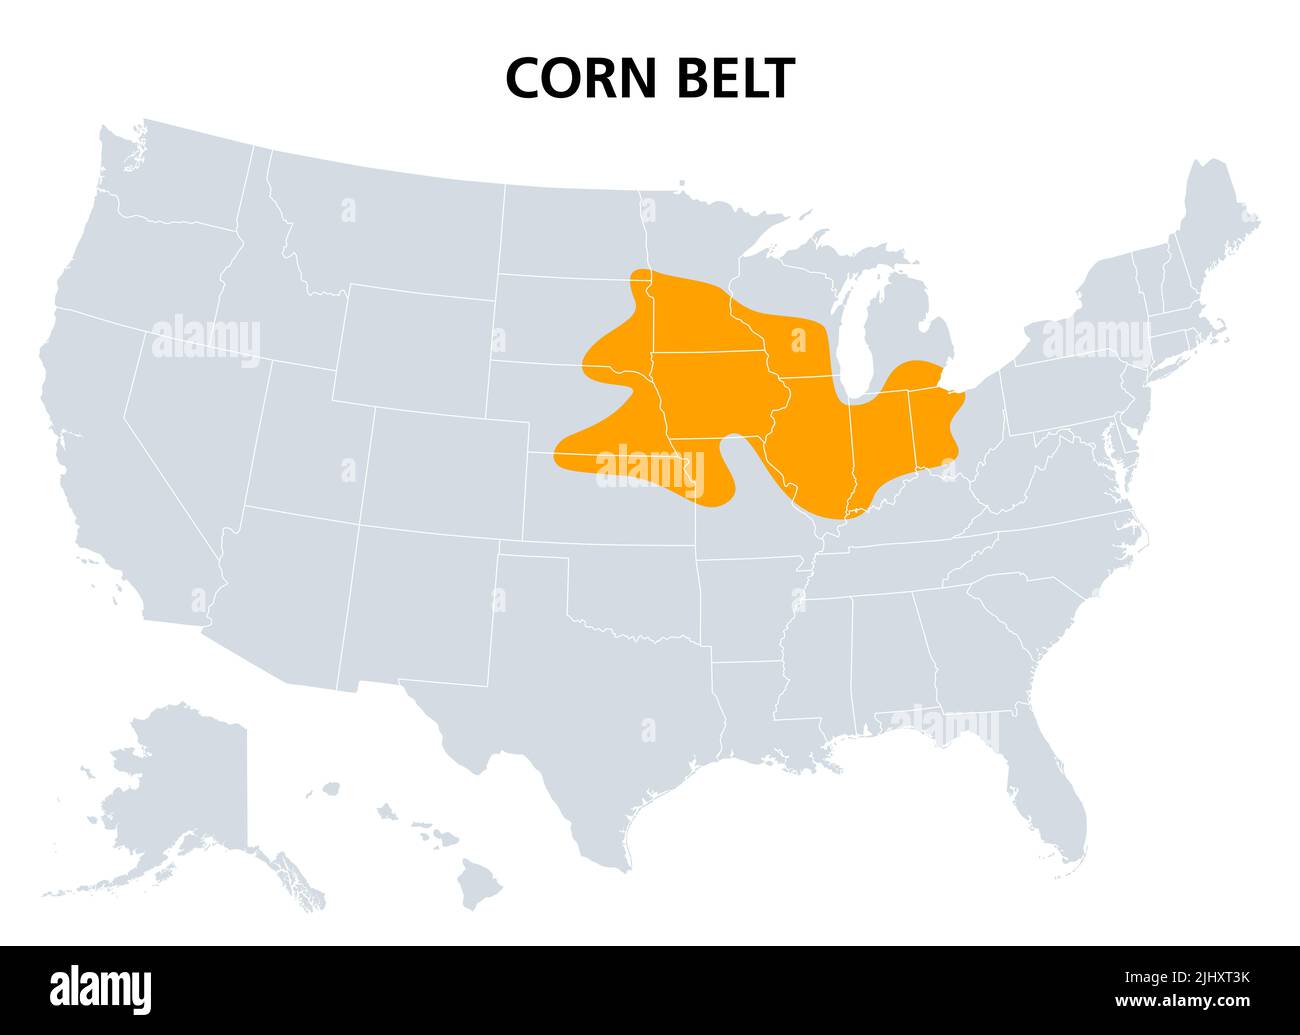 Corn Belt of the United States, political map. The region in the American Midwest where maize is the dominant crop. Stock Photo